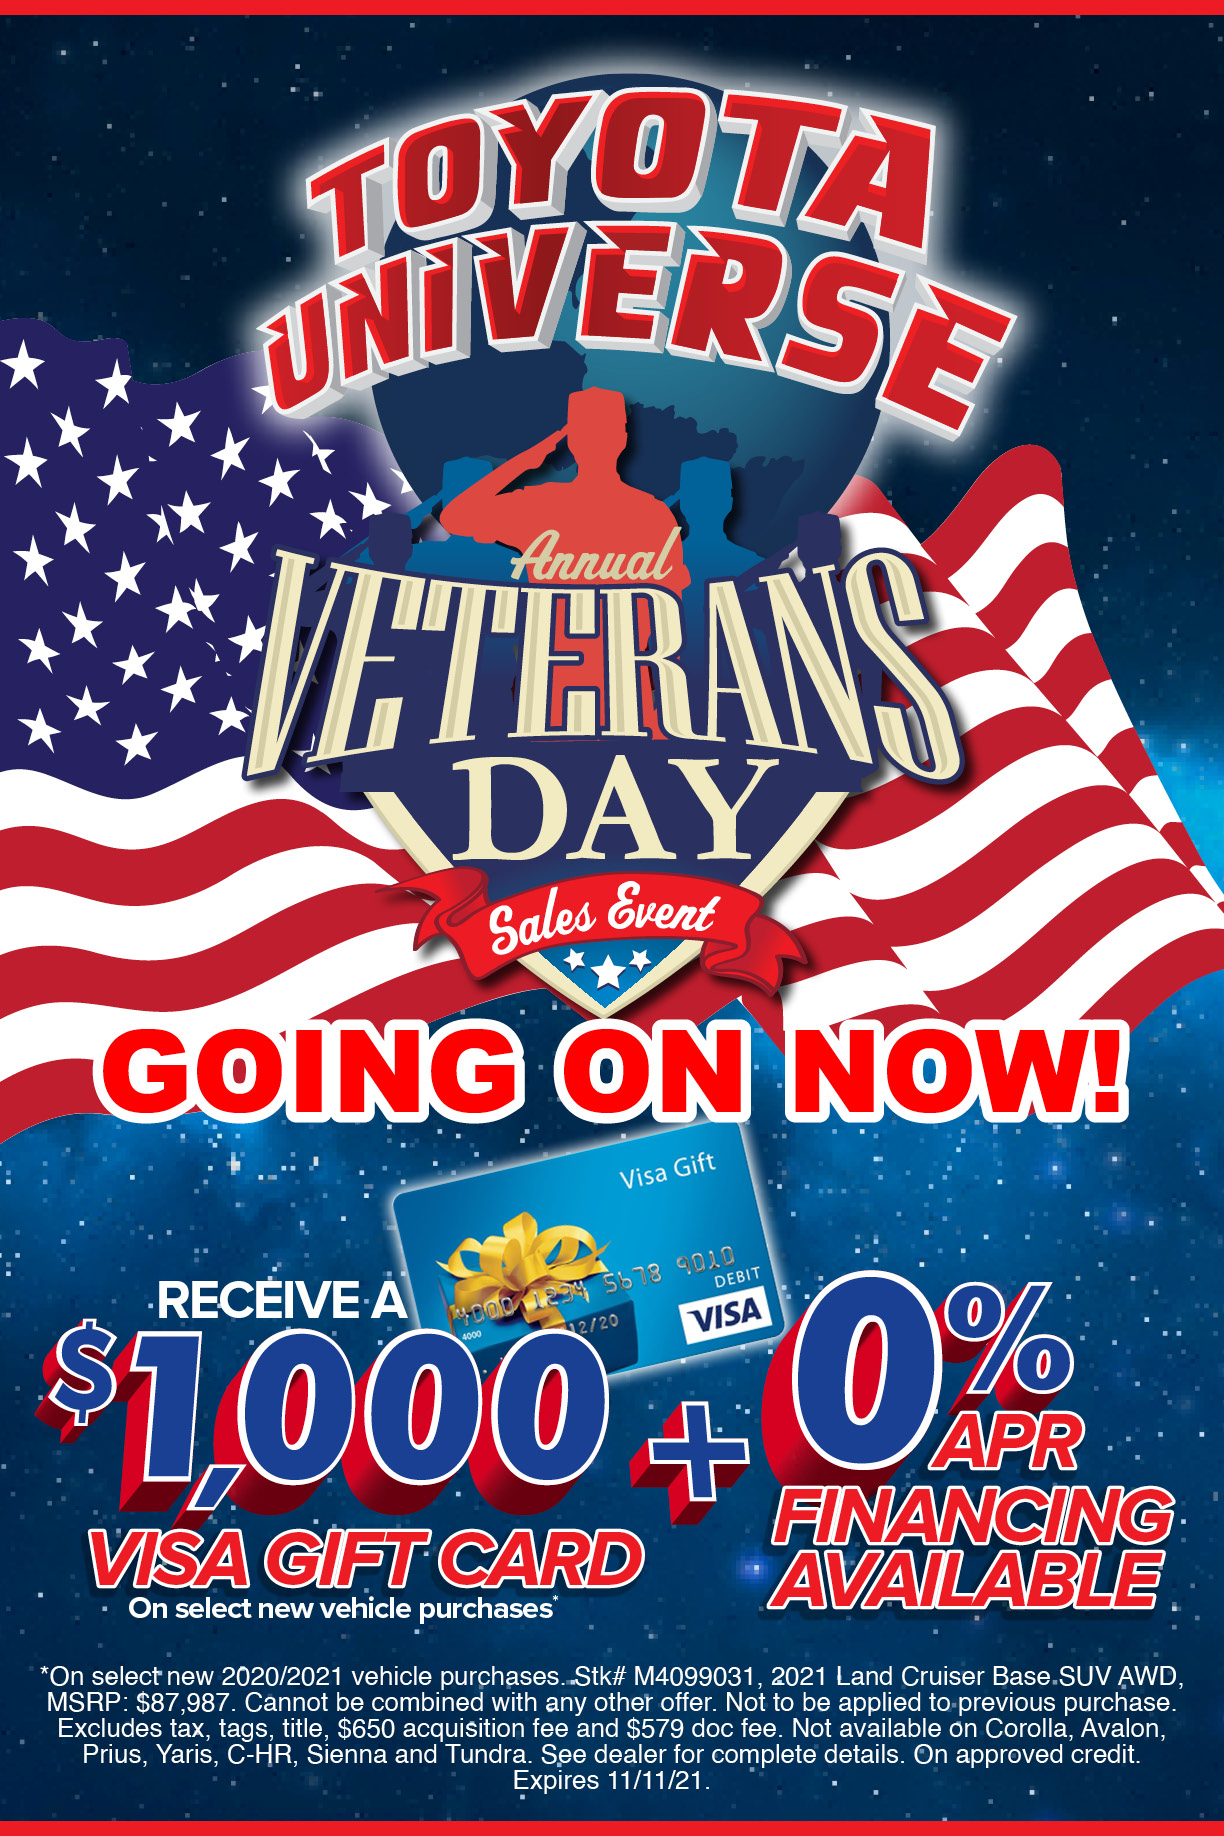 Annual Veterans Day Sales Event Toyota Universe